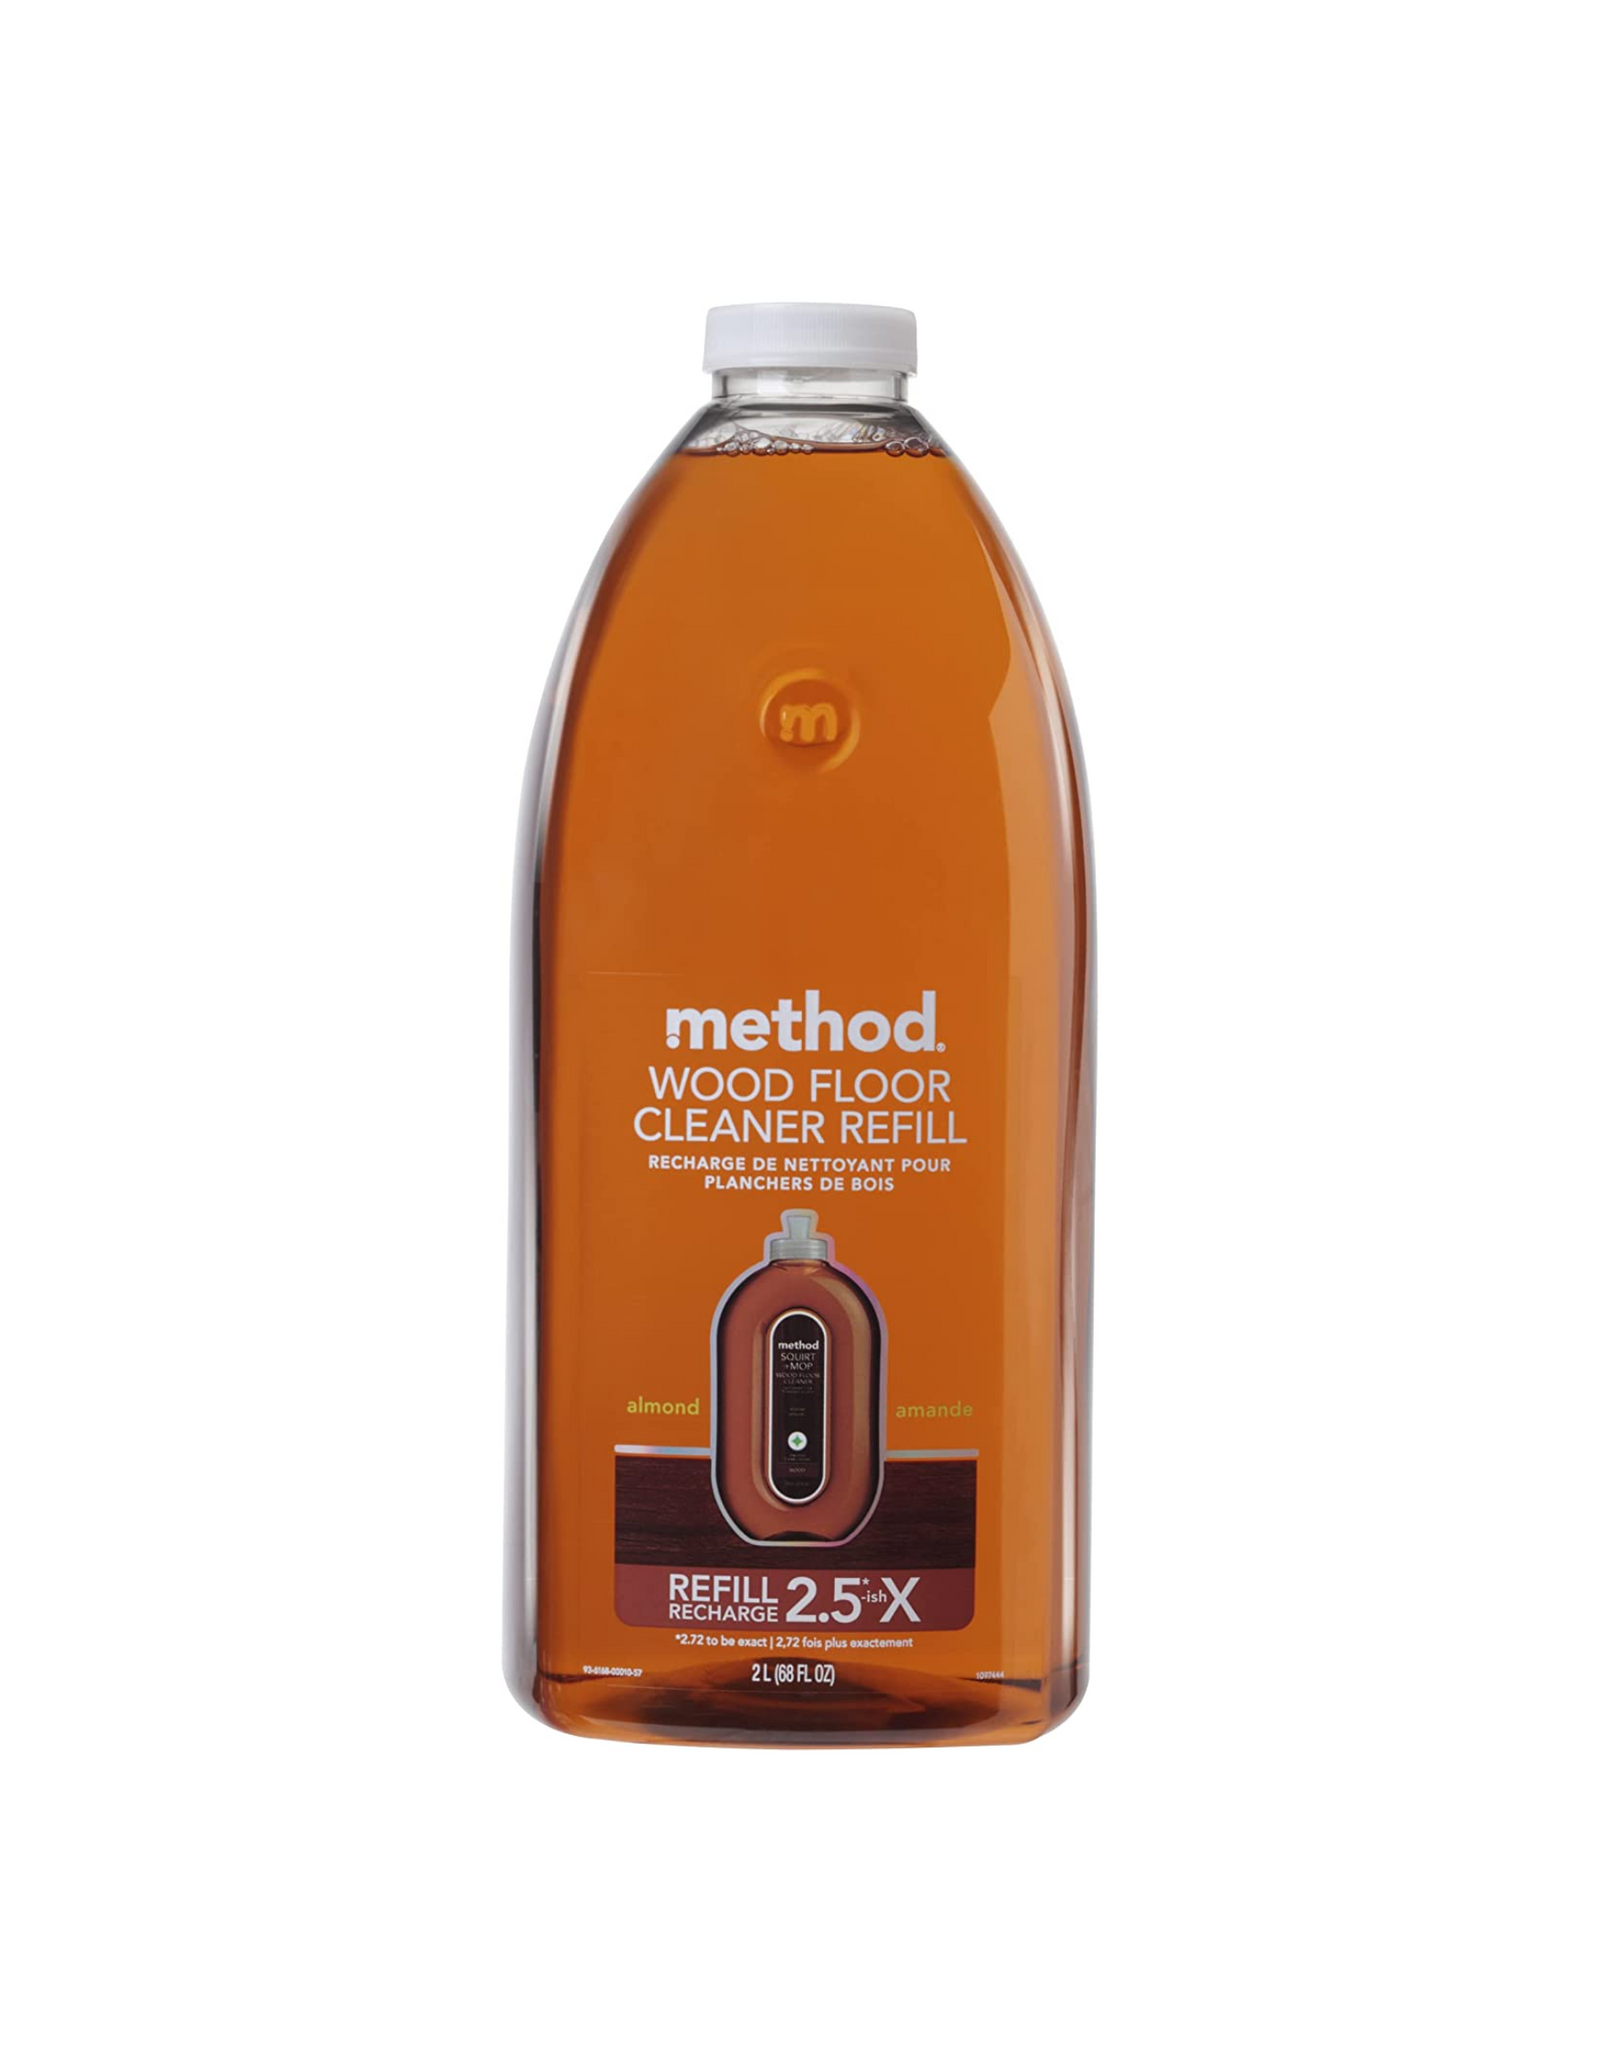 Method Hardwood Floor Cleaner Refill, Almond Scent, 2 L , Packaging May Vary